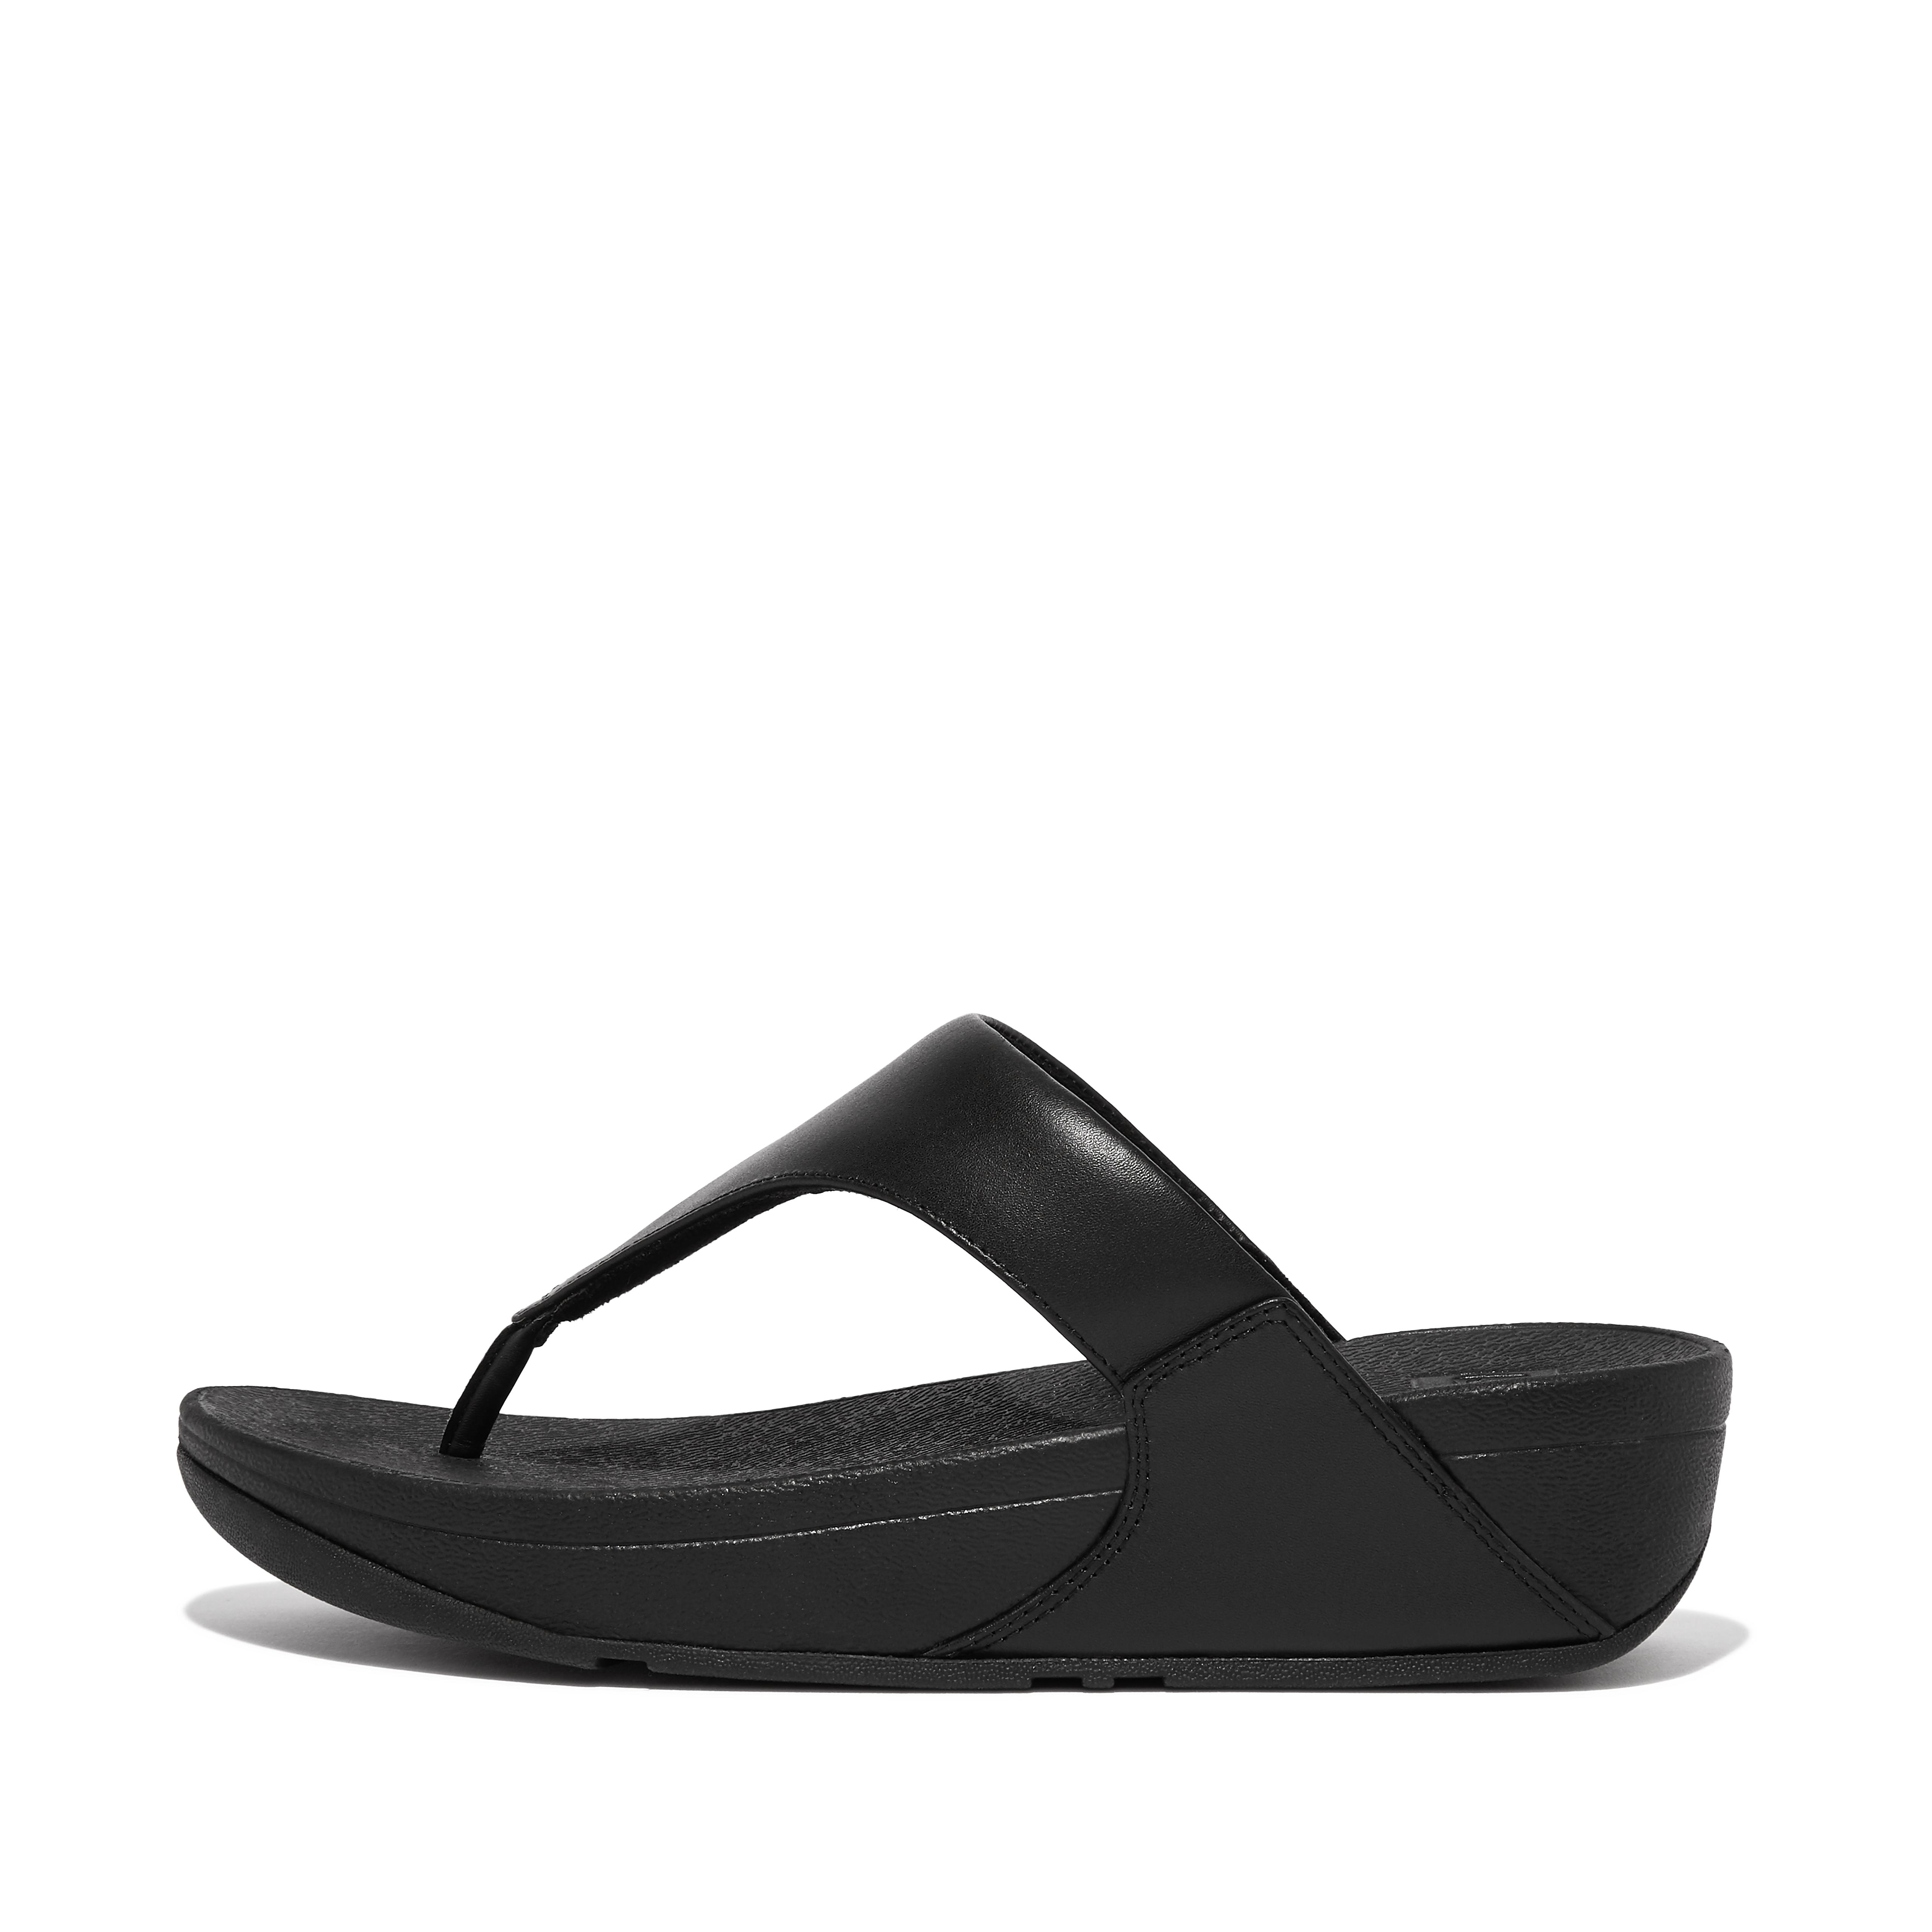 Official FitFlop Online Shoe Store